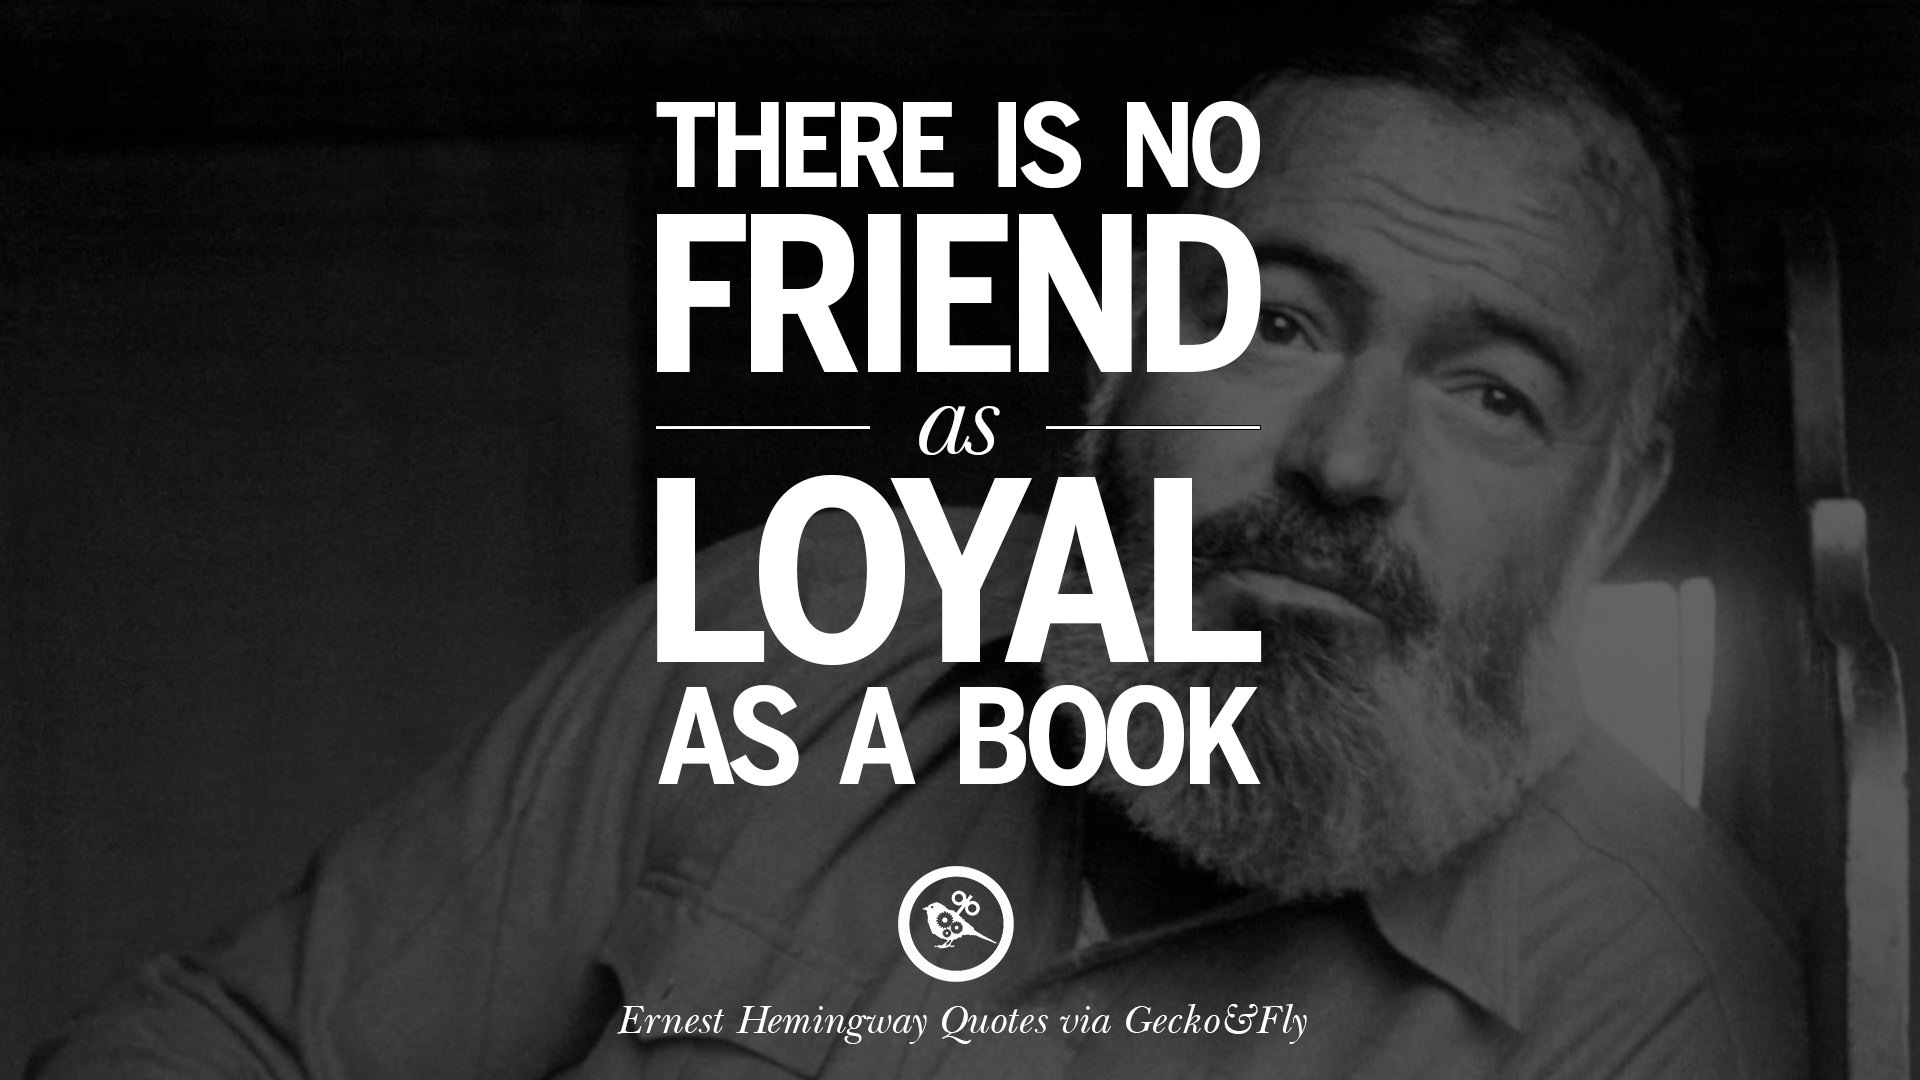 14 Quotes By Ernest Hemingway On Love, Life And Death